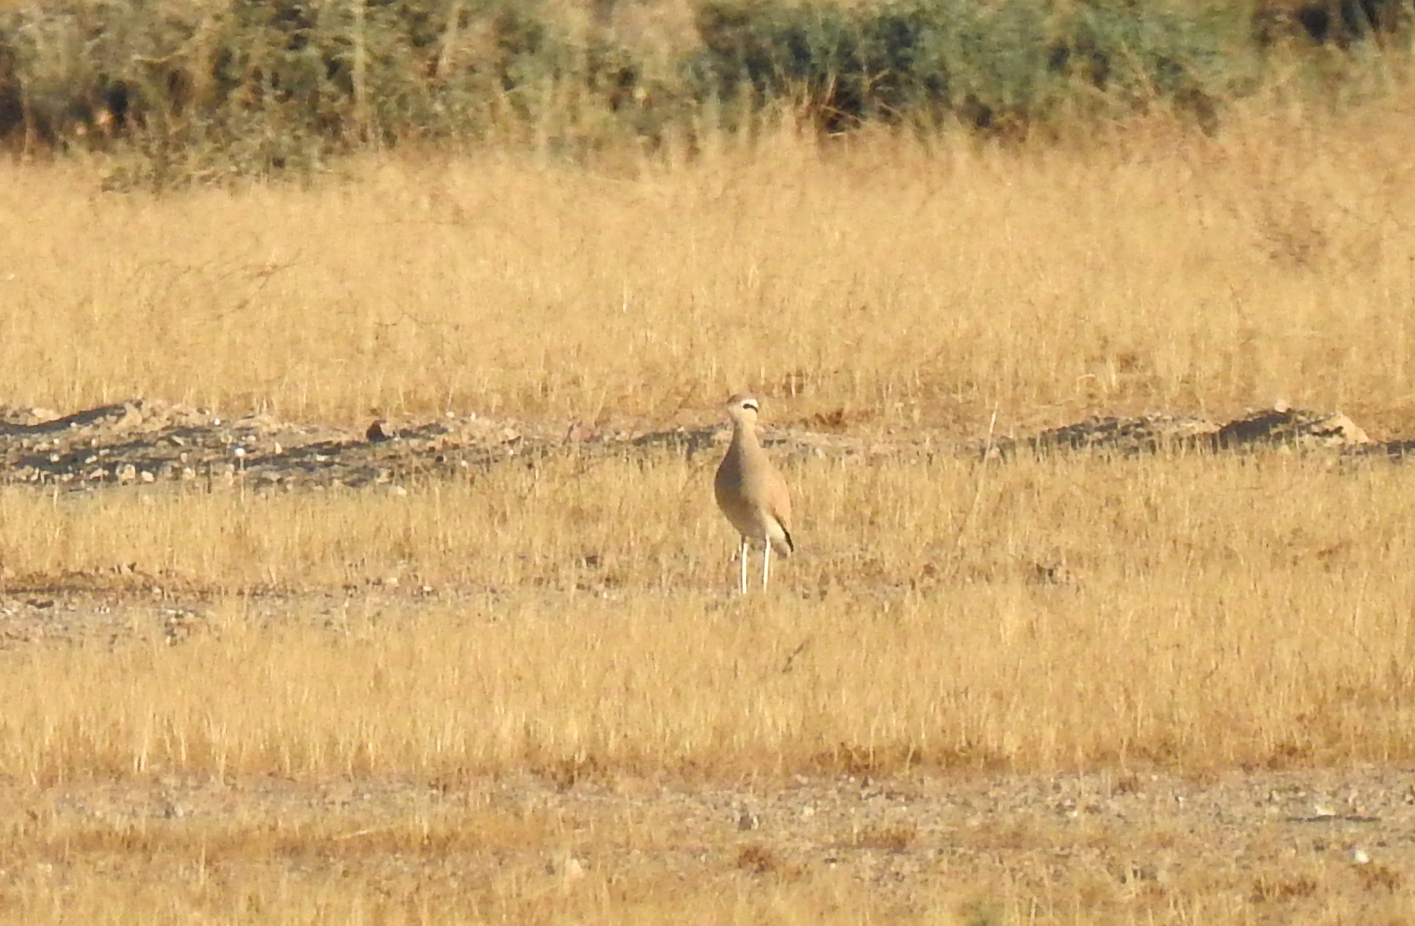 Closing in on my first cream-coloured courser